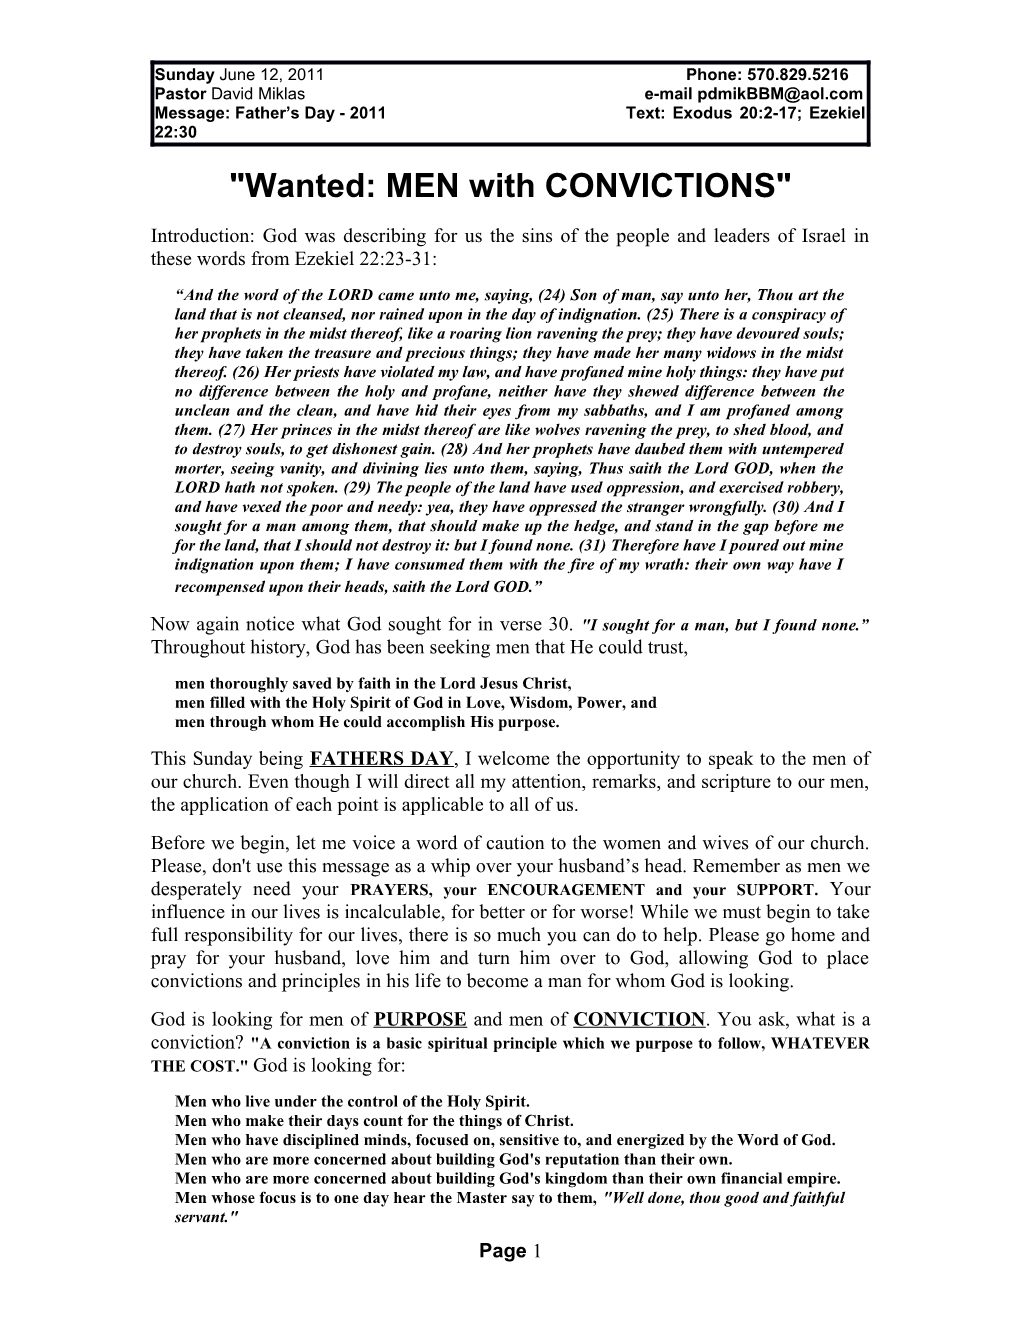 Wanted MEN of CONVICTION